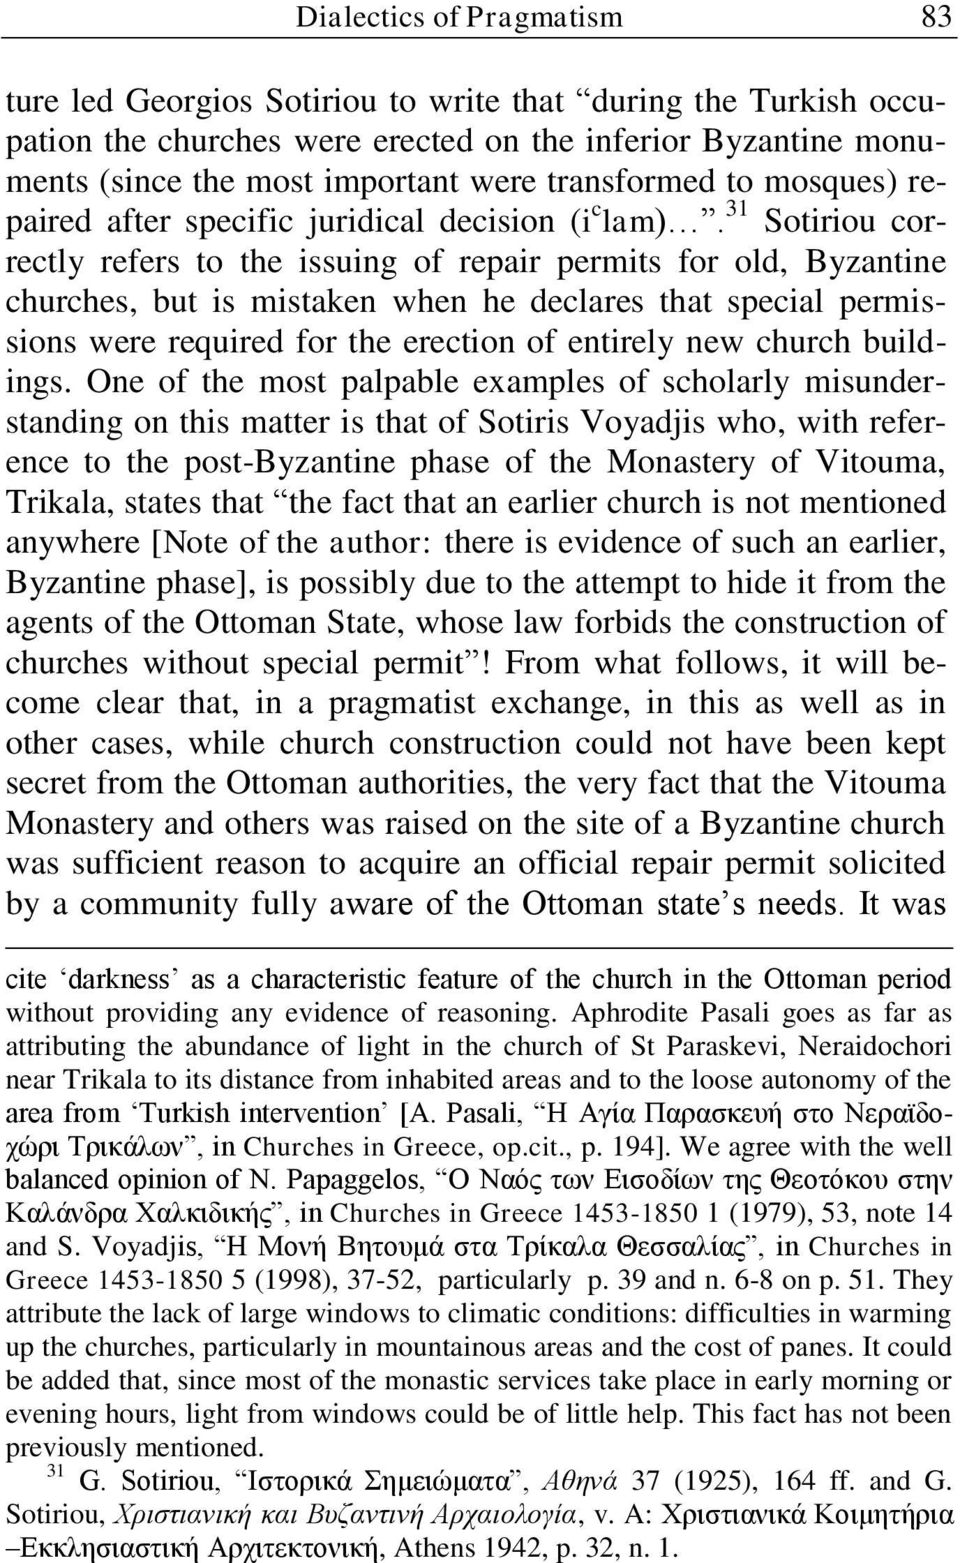 31 Sotiriou correctly refers to the issuing of repair permits for old, Byzantine churches, but is mistaken when he declares that special permissions were required for the erection of entirely new